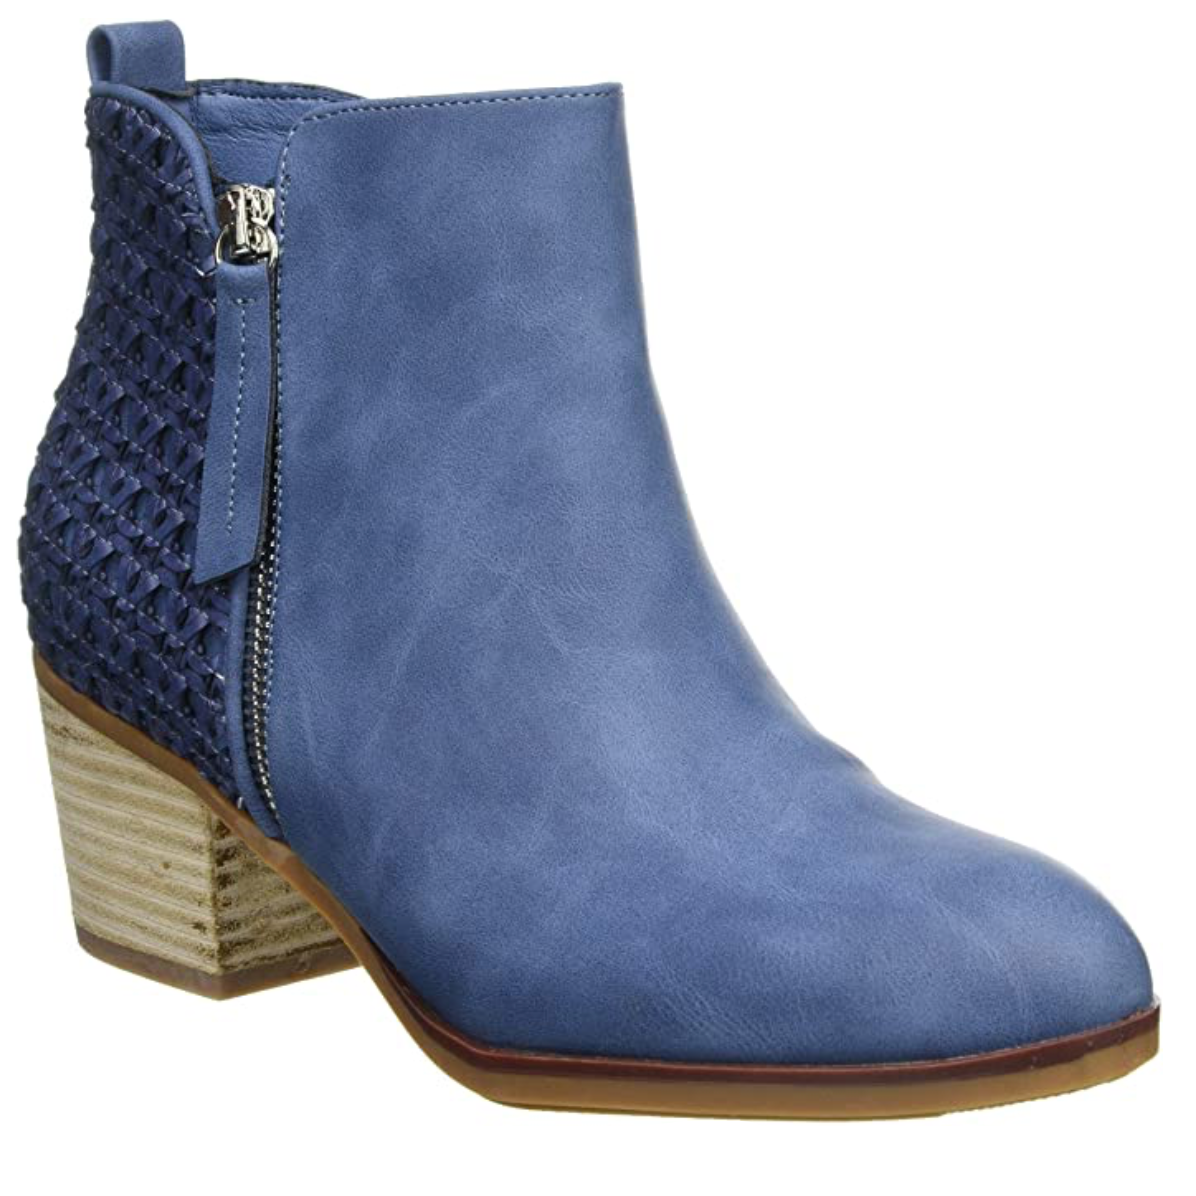 XTI - 42371 - Women's Ankle Boot - Blue - The Foot Factory